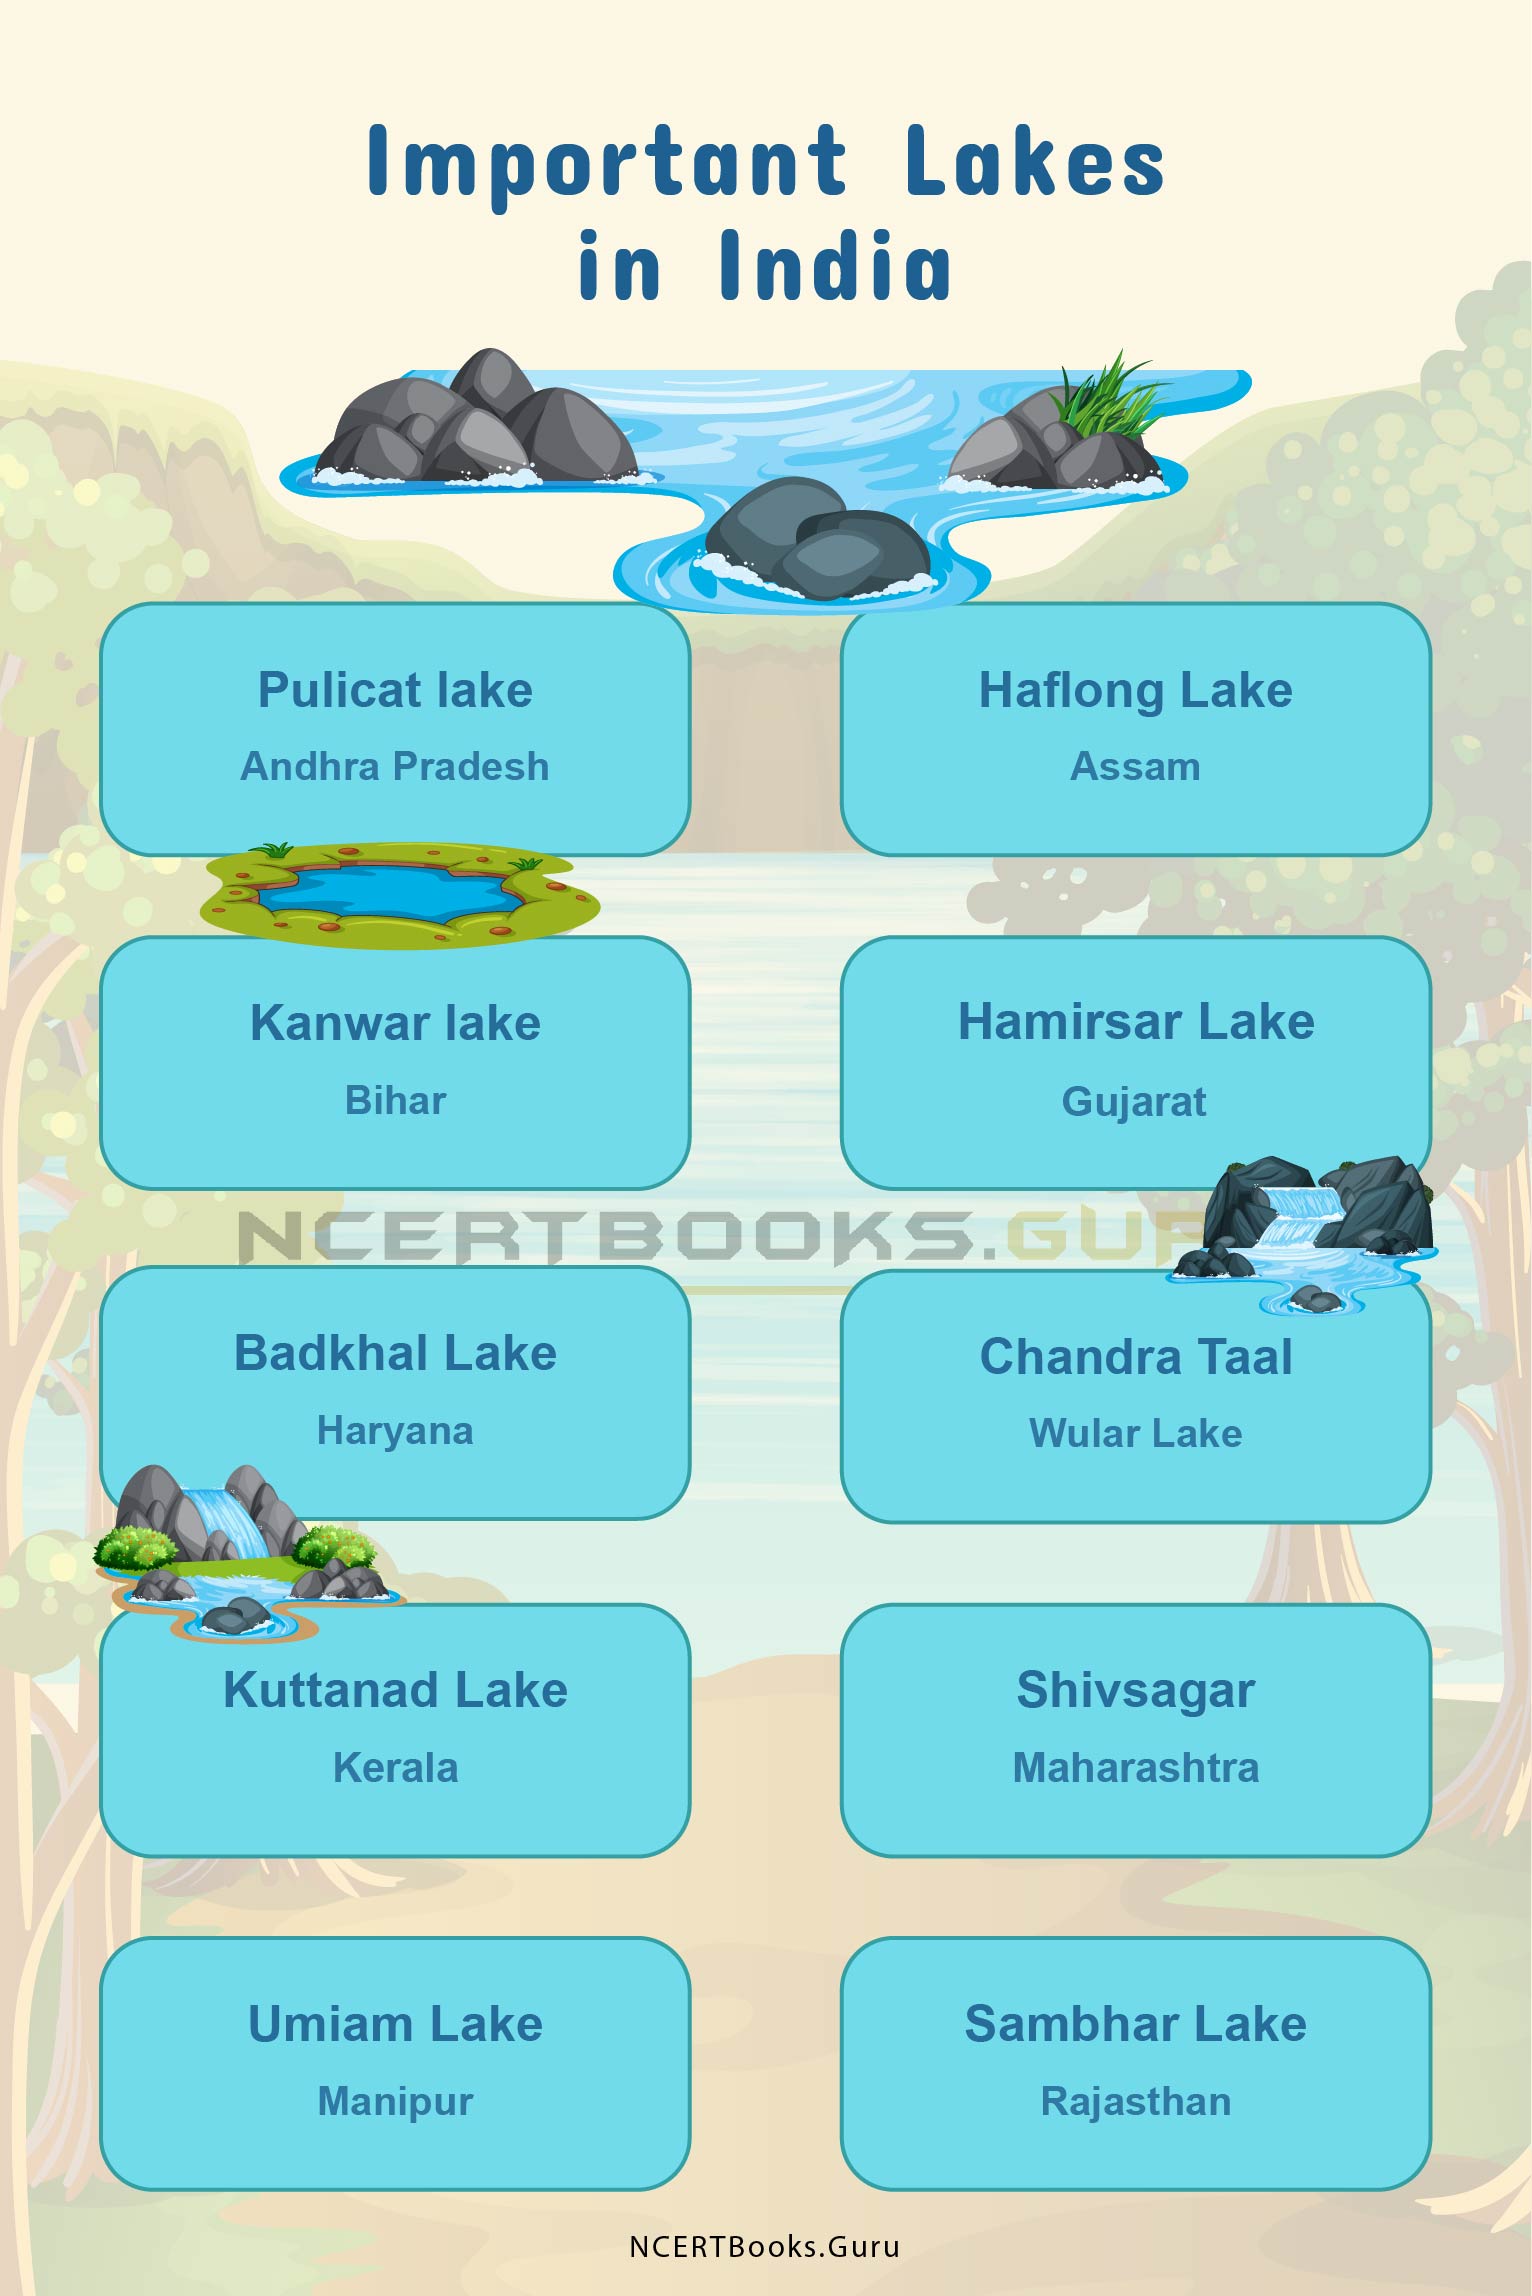 Important Lakes in India 2